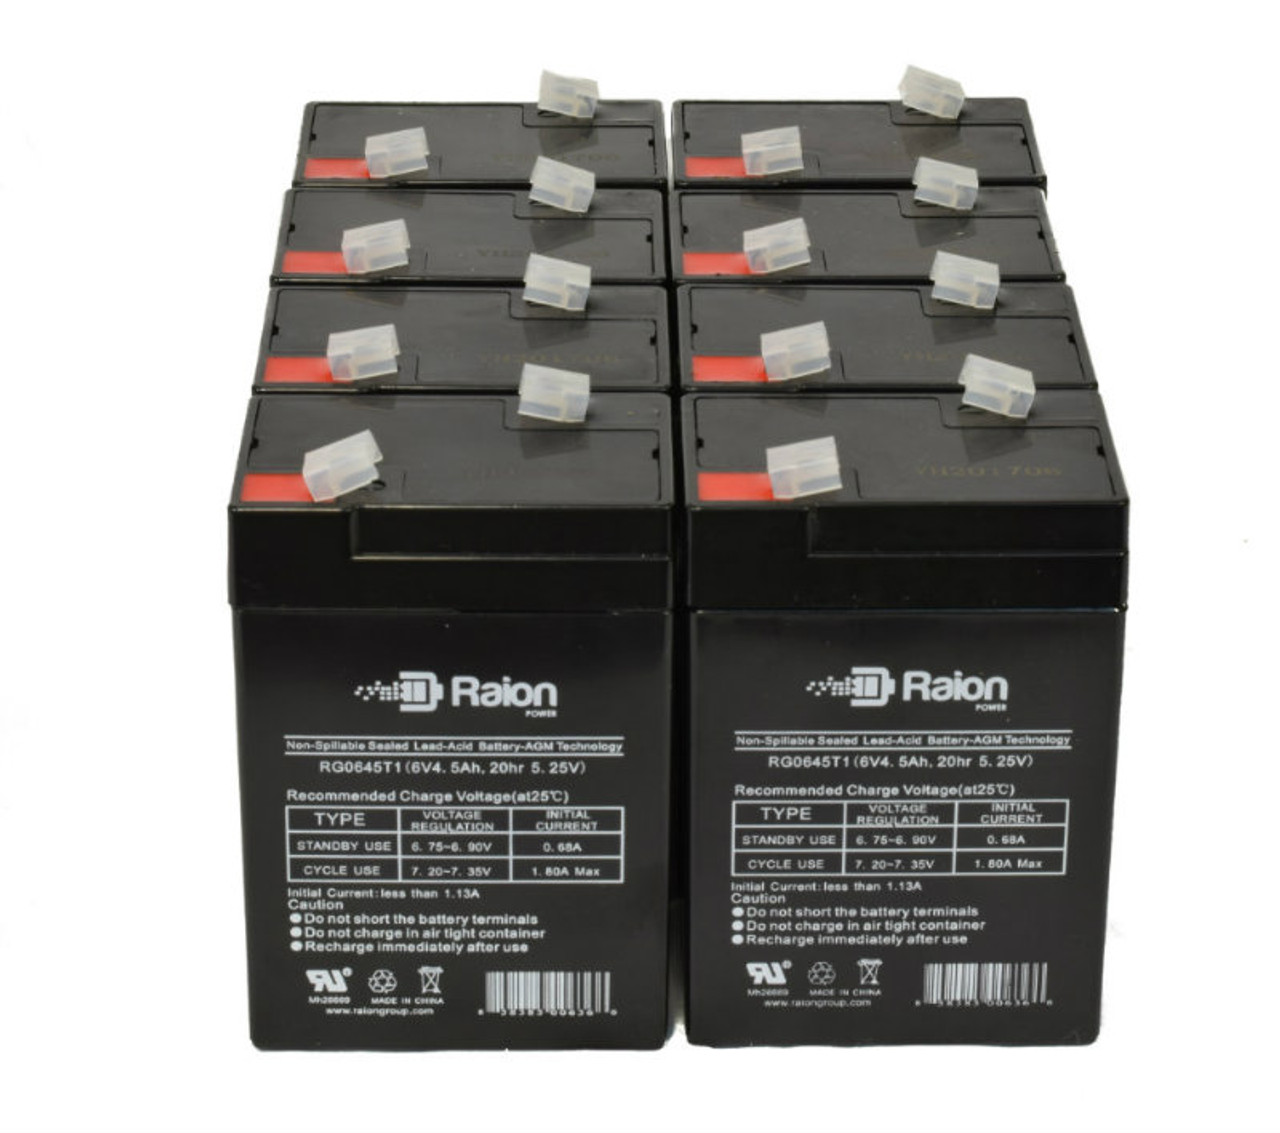 Raion Power 6V 4.5Ah Replacement Emergency Light Battery for Light Alarms DS3 - 8 Pack